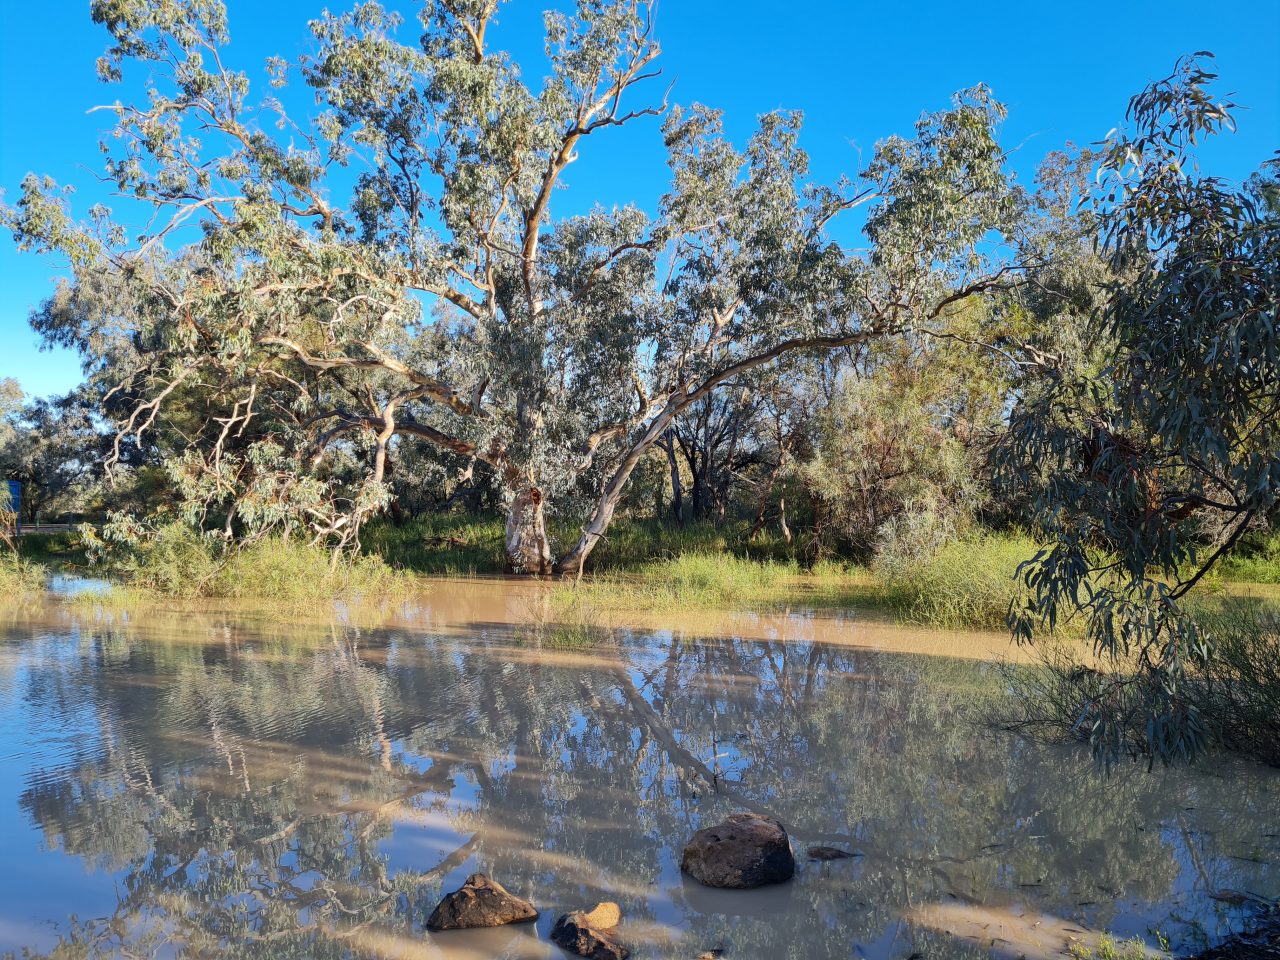 Photo of trees and low vegetation surrounded by a shallow flood of water on a sunny day with bright blue sky